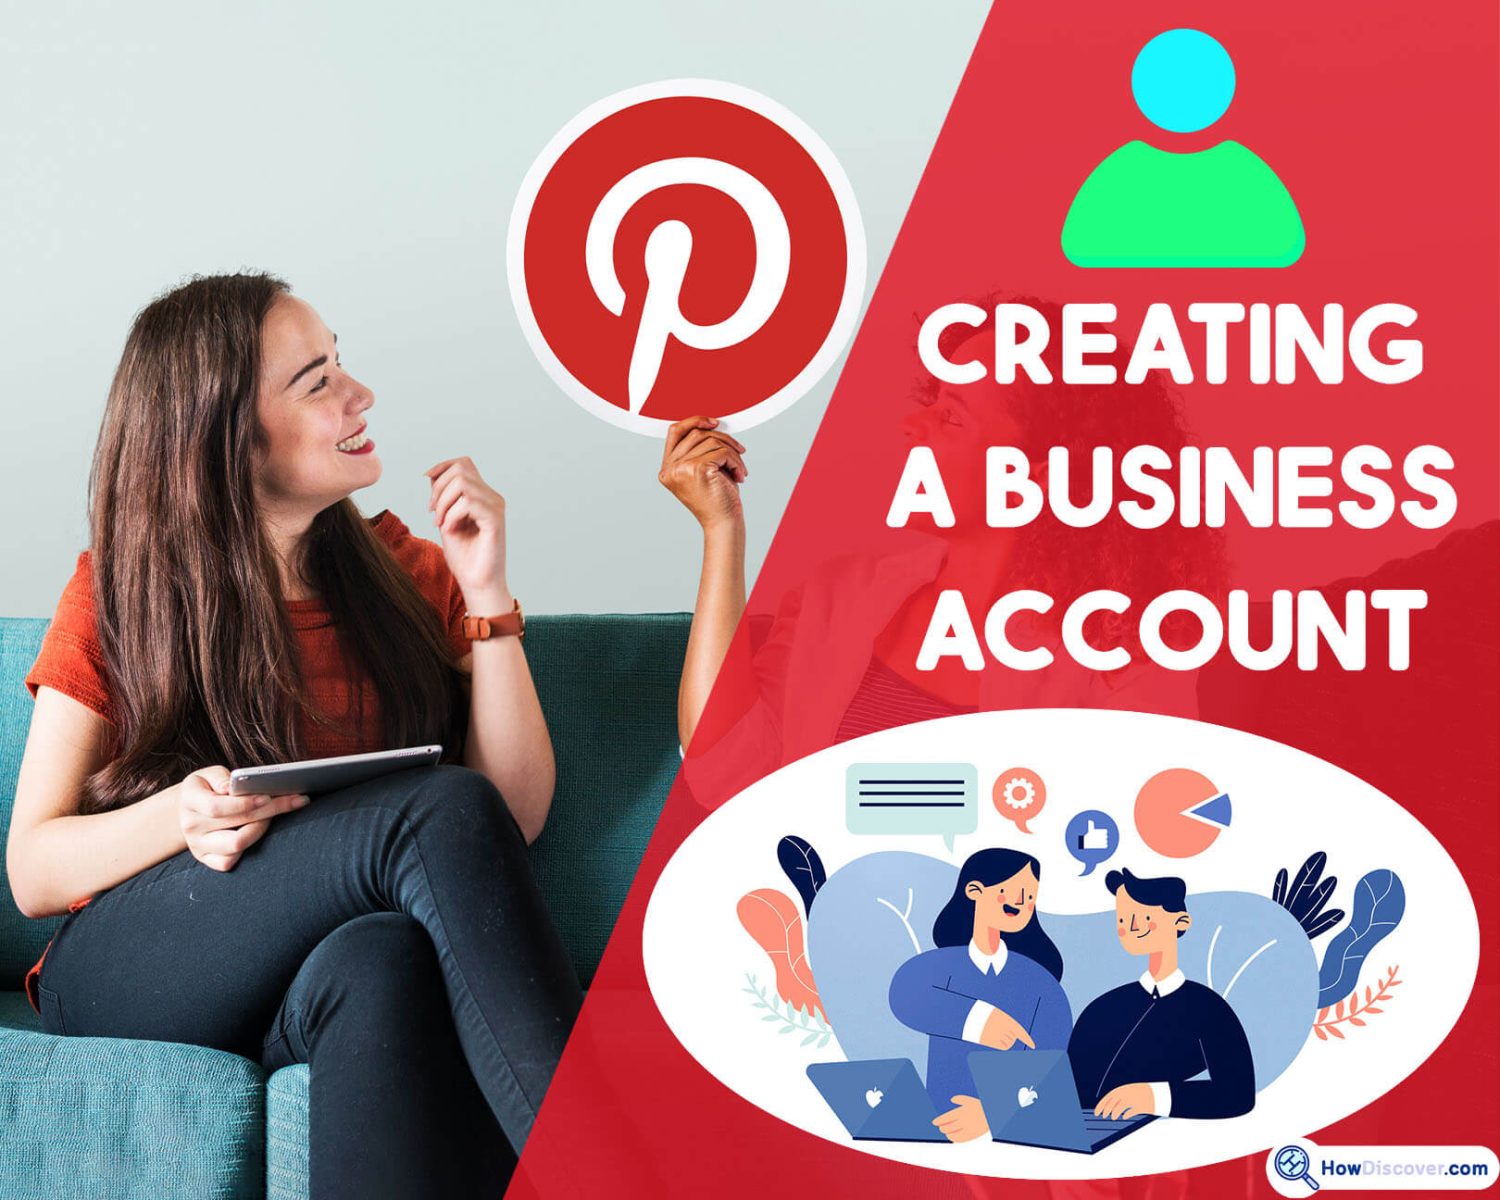 How To Use Pinterest - creating a business account on Pinterest